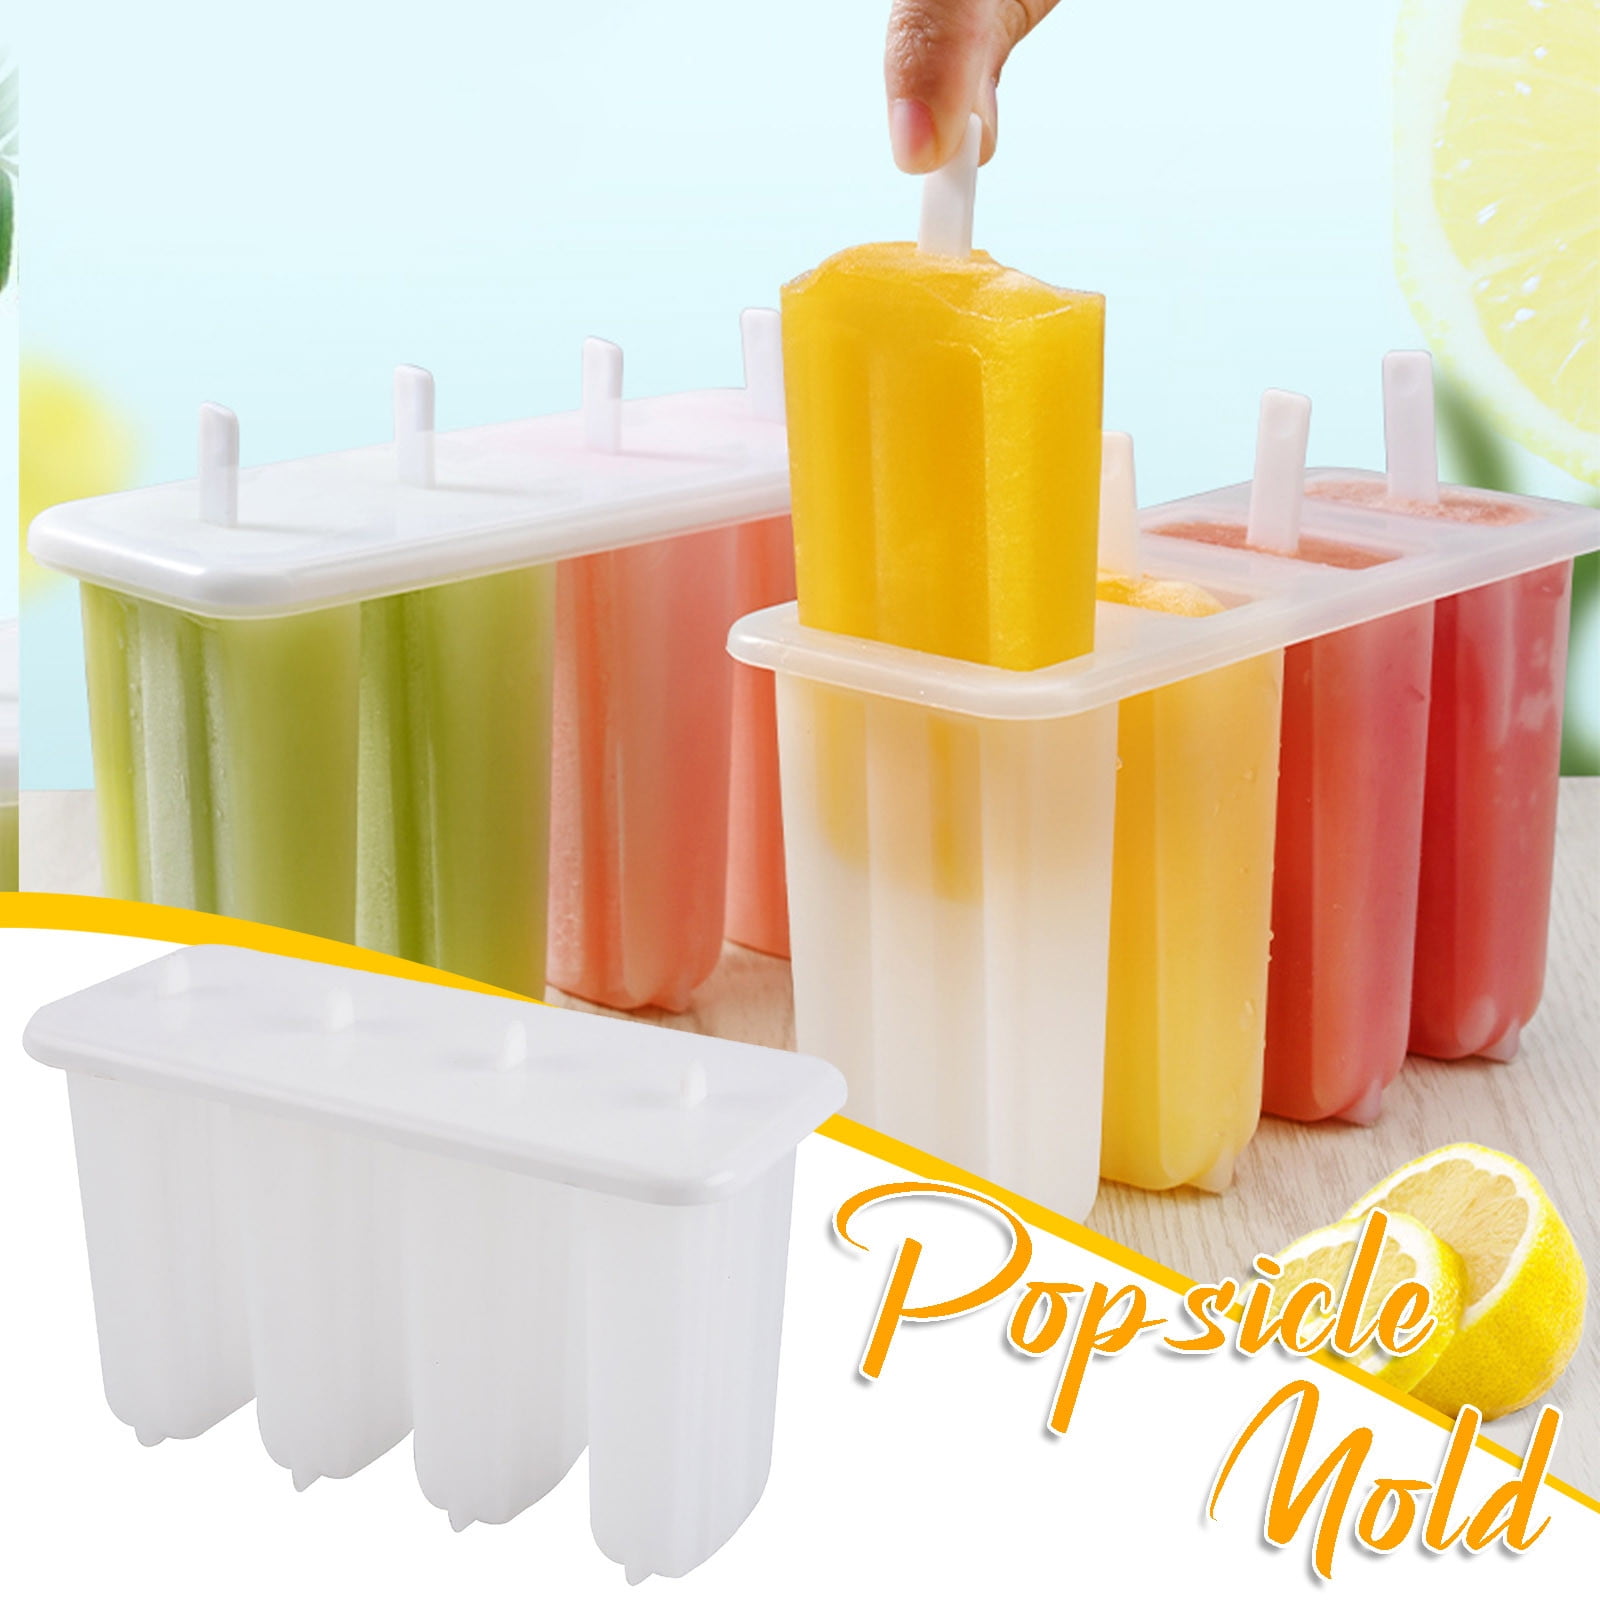 Bell Dream Popsicle MouldPopsicle Molds 6 Pieces Silicone Ice Pop Molds BPA Free Popsicle Mold Reusable Easy Release Ice Pop Make (Green)